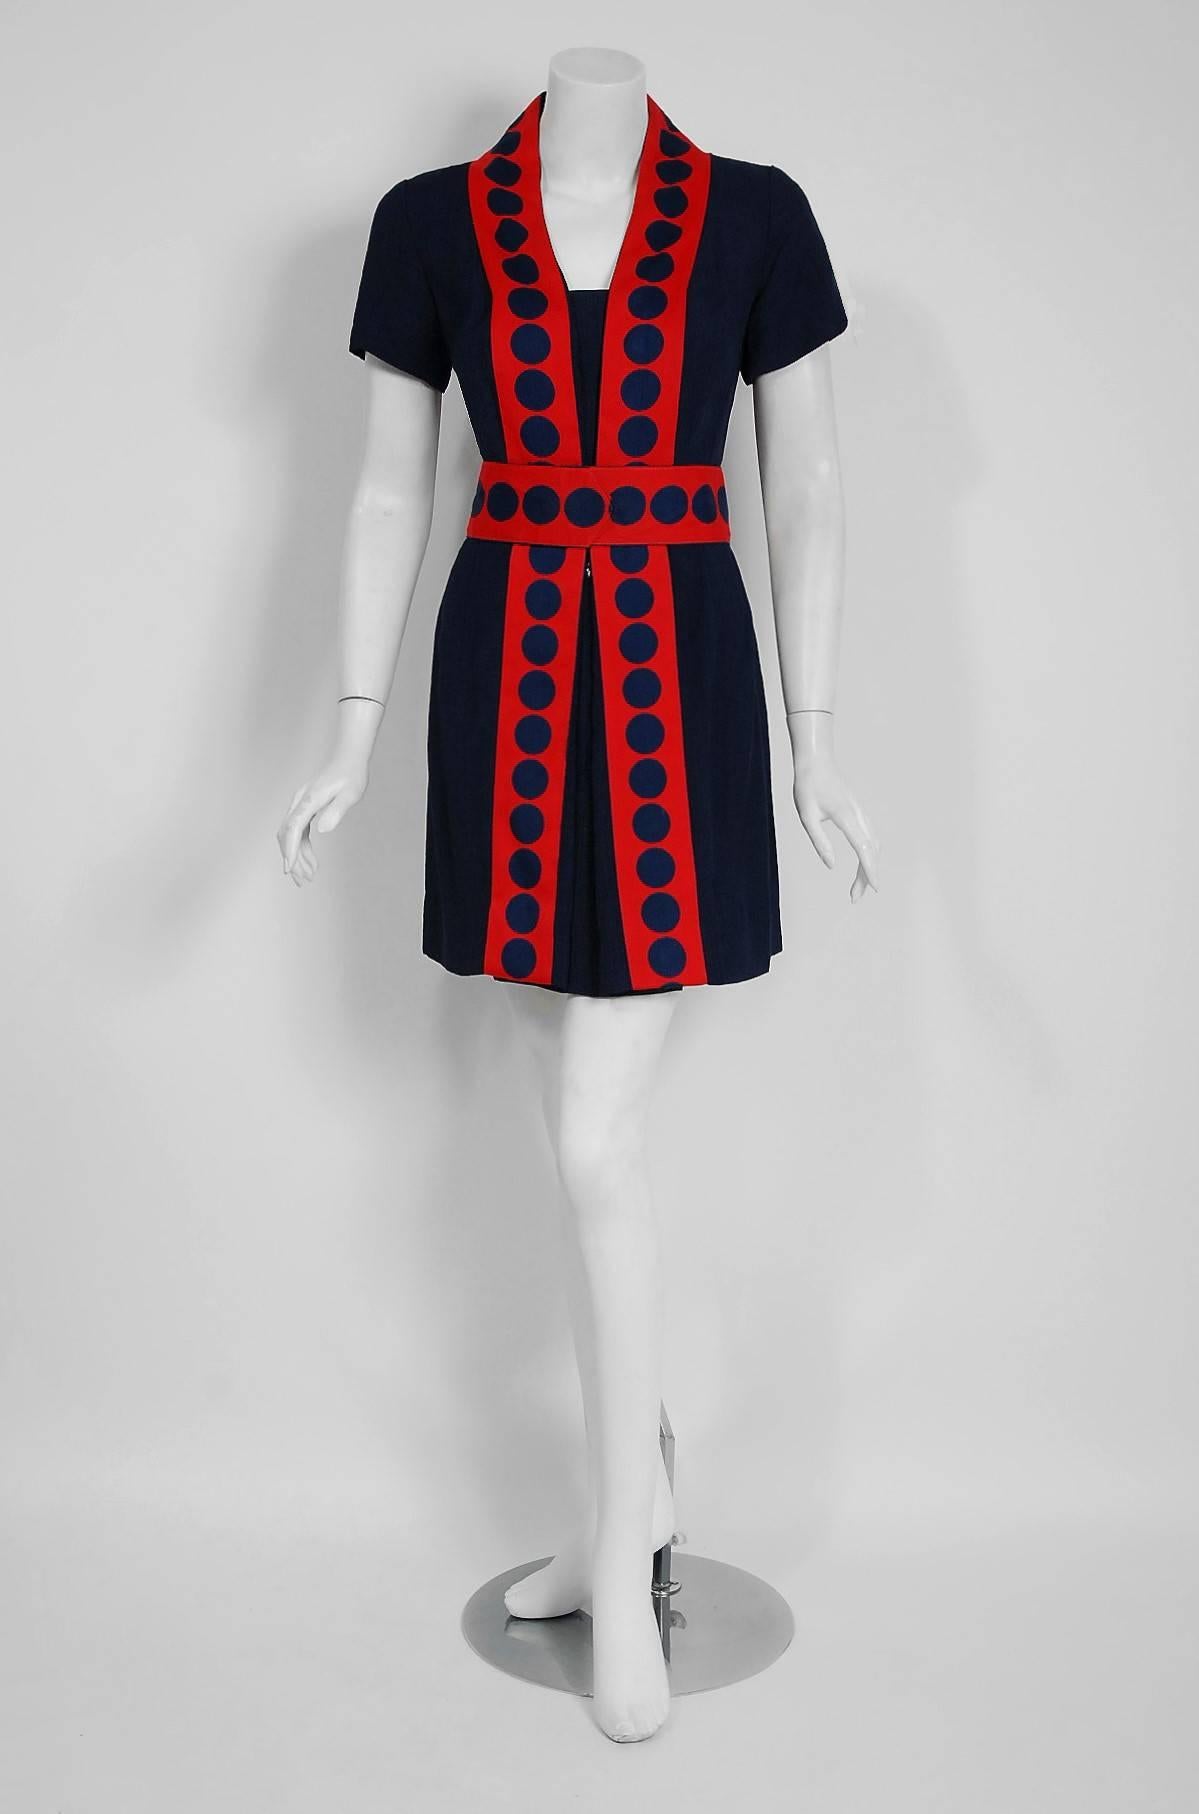 Truly a wonderful and unique space-age designer dress by Richard Frontman. I think this is one of the best examples of 1960's graphic mod fashion I have seen in a long time. The design was obviously inspired by Courreges and Cardin who were the